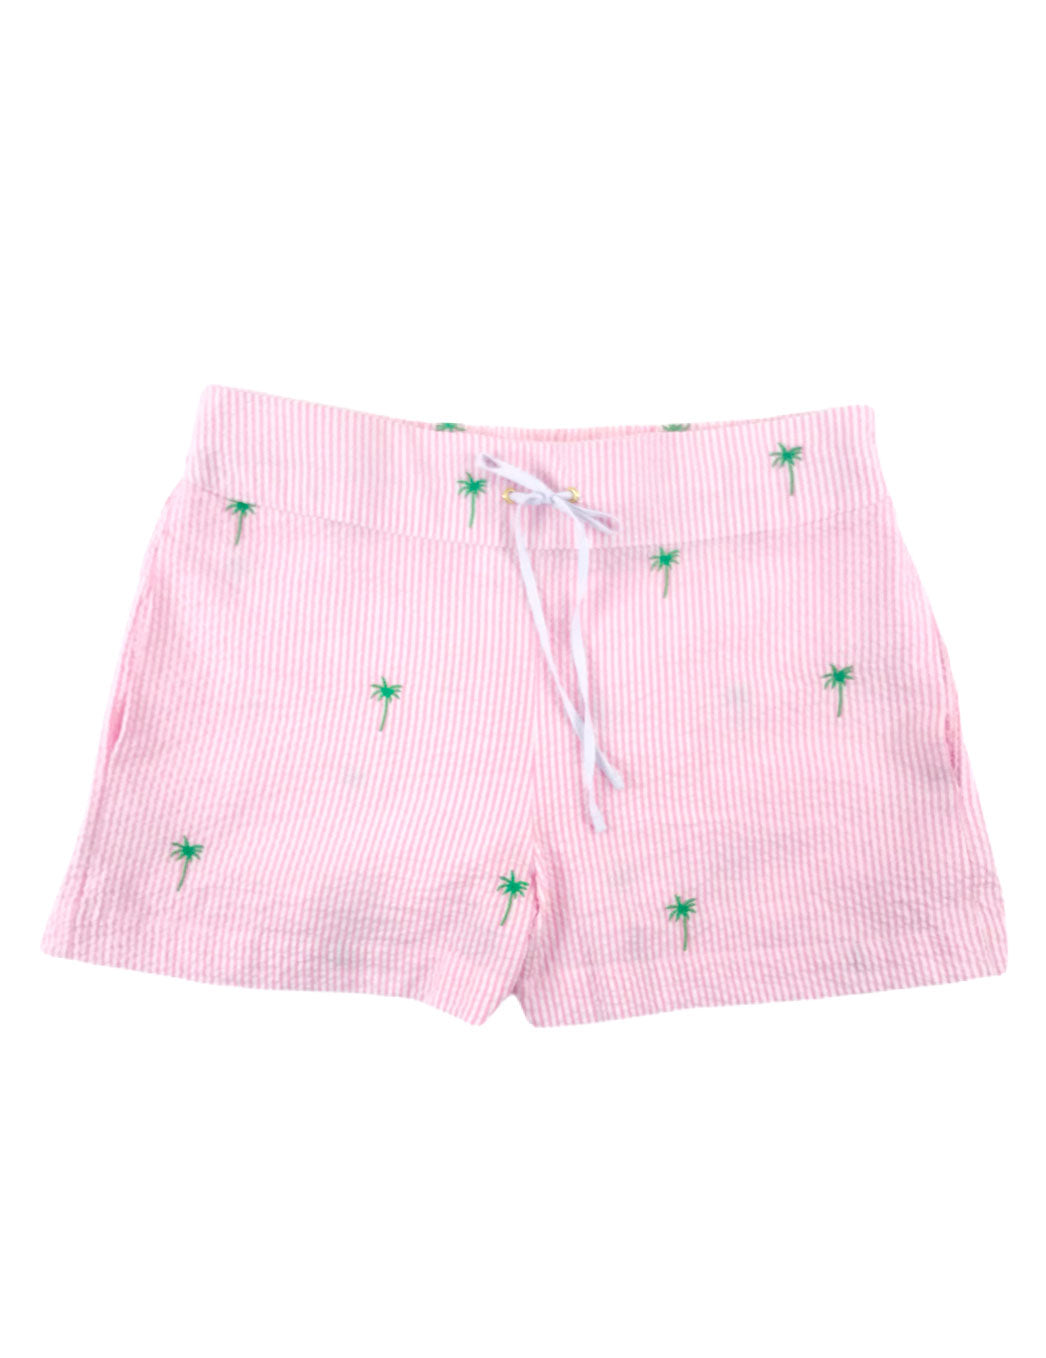 Pink Seersucker Women's Lounge Short with Green Embroidered Palm Trees